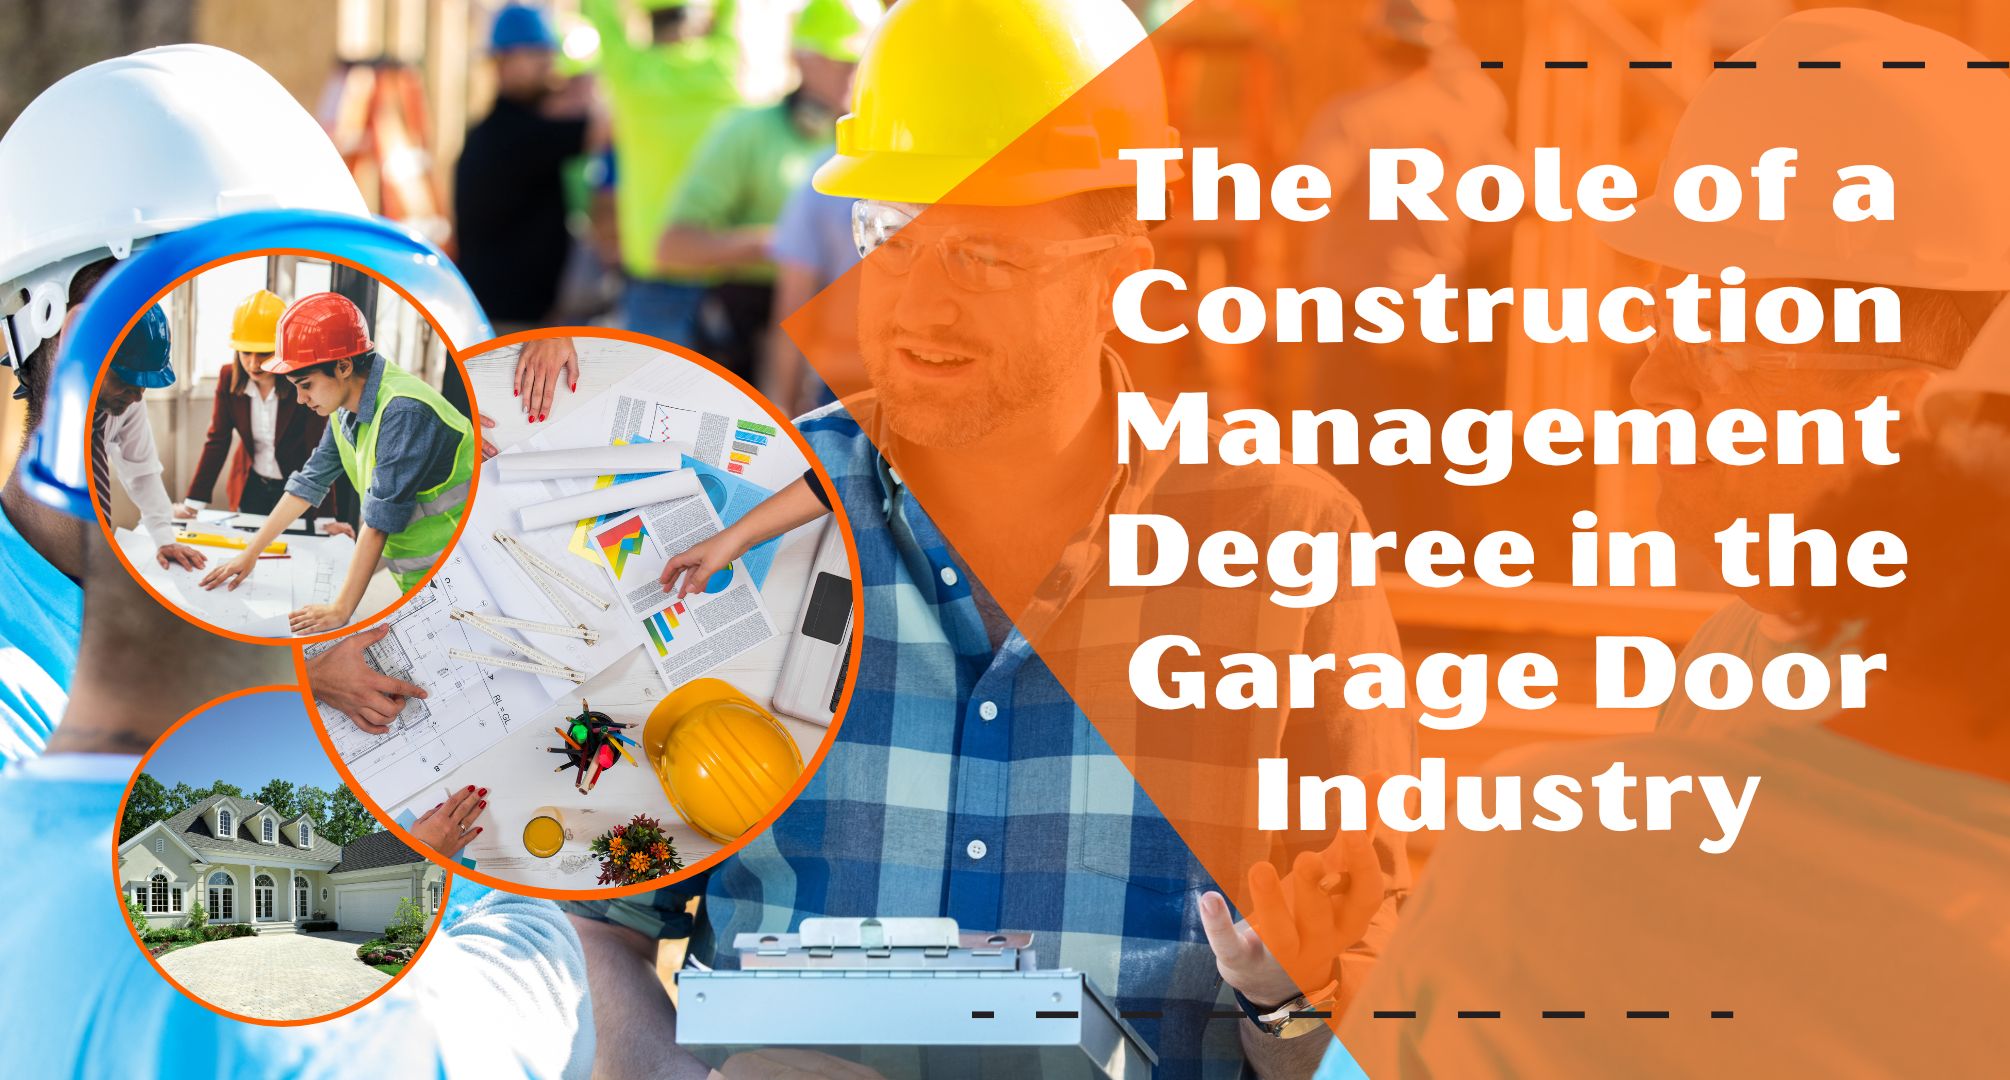 The Role of a Construction Management Degree in the Garage Door Industry